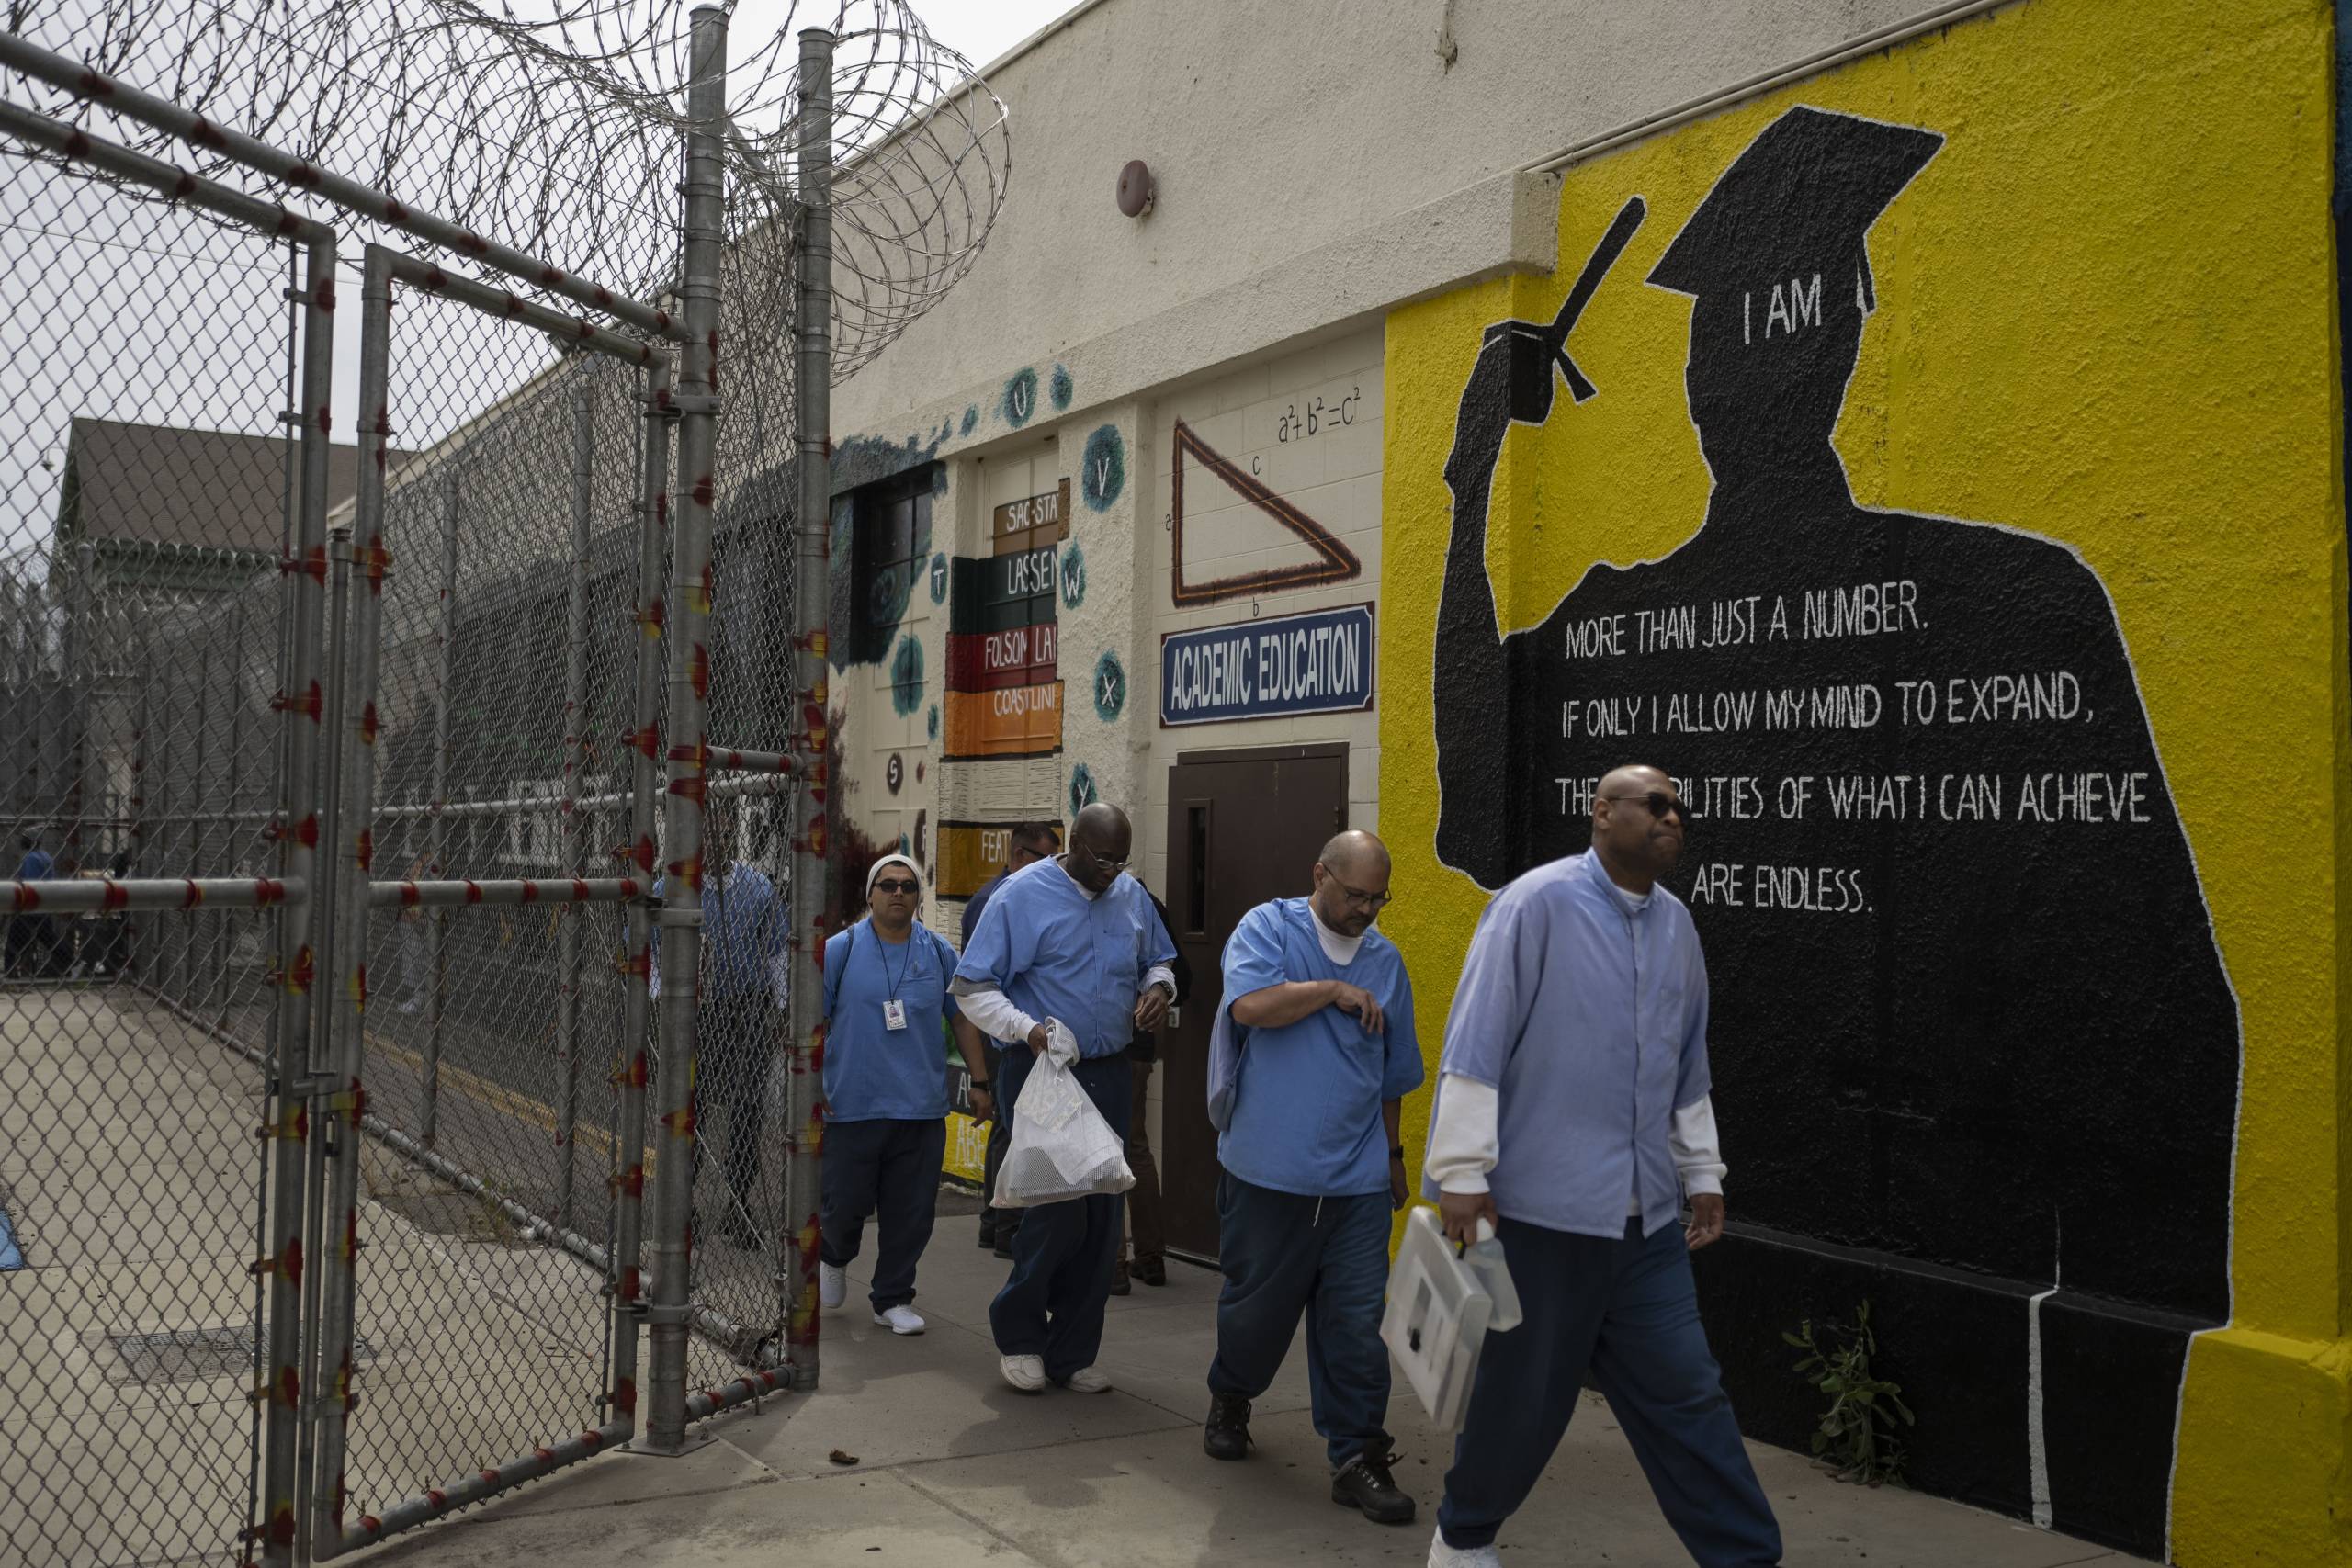 A group of men, wearing blue prison shirts, walk out of a fenced yard, past a mural of a person in a gown, that says: 'More than a number.'